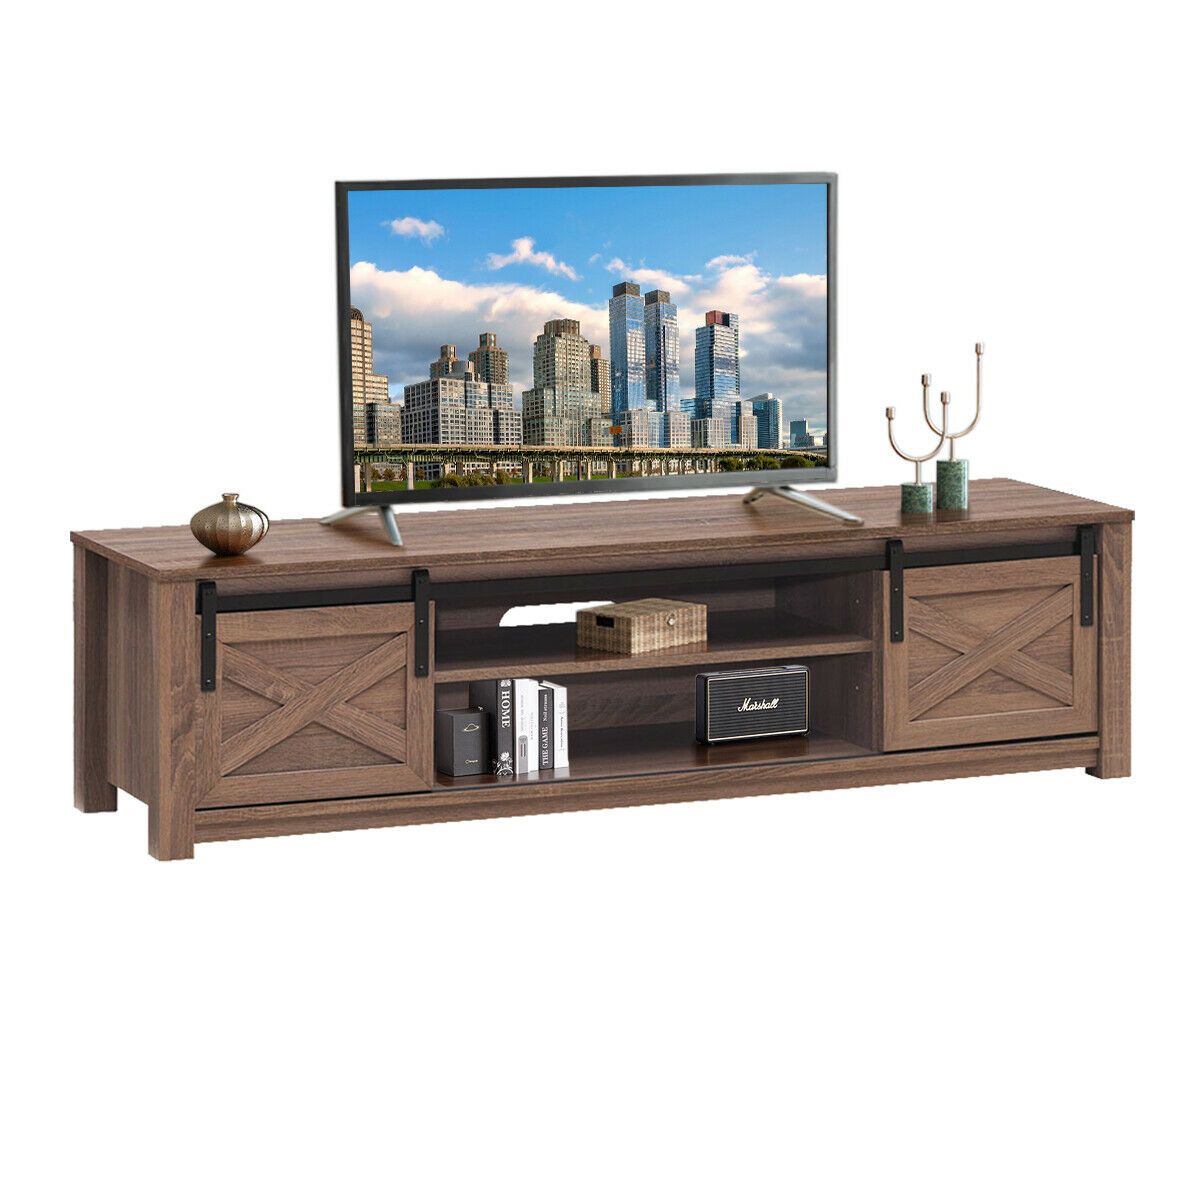 Gymax Sliding Barn Door Tv Stand For Tv's Up To 65 Within Caleah Tv Stands For Tvs Up To 65" (View 6 of 15)